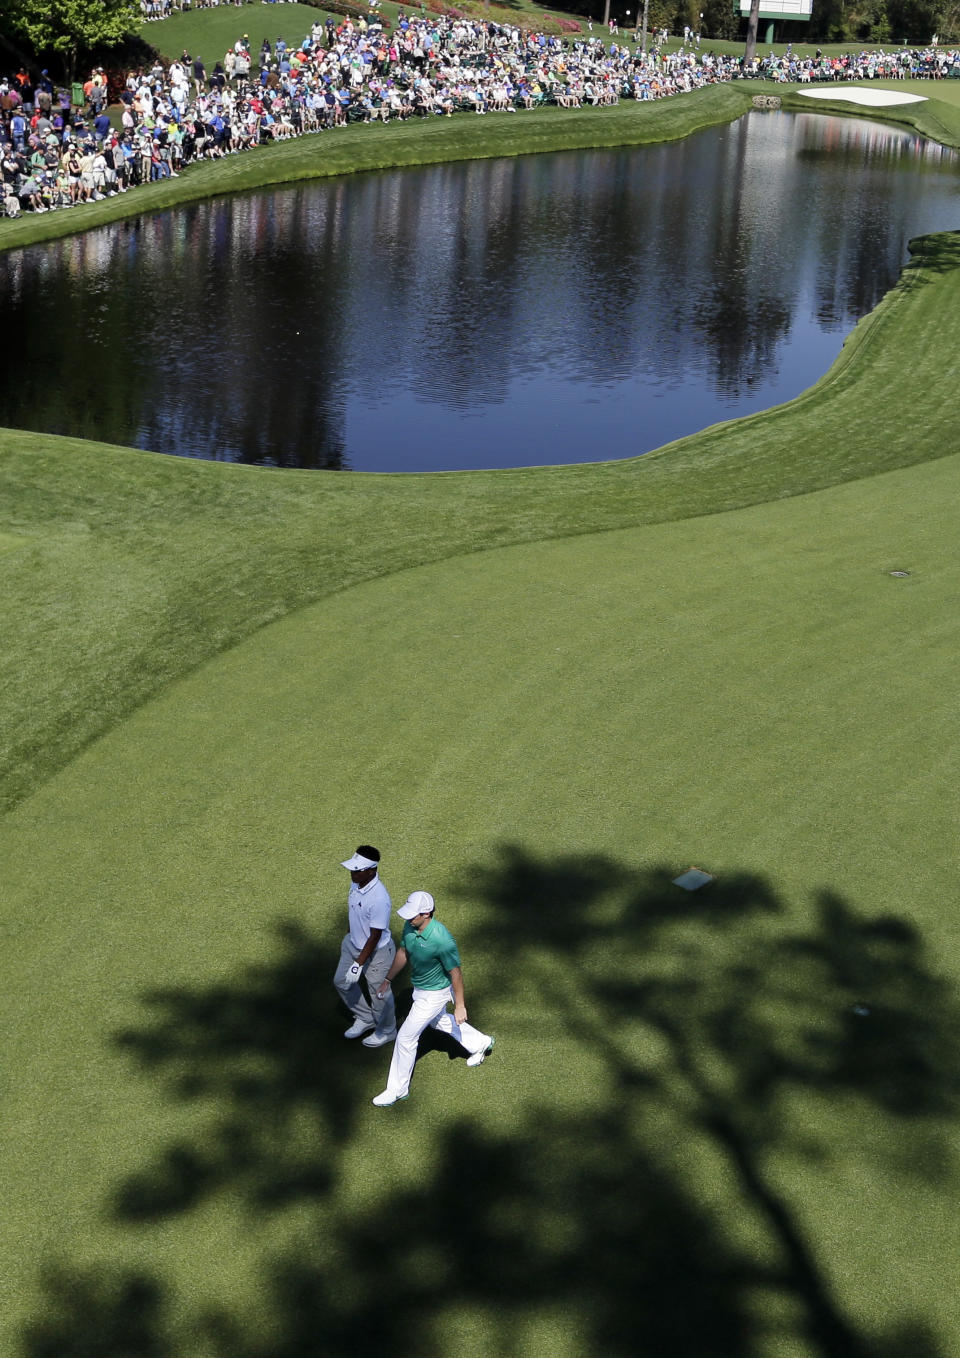 Thongchai Jaidee, left, of Thailand, walks on the 16th fairway with Rory McIlroy, of Northern Ireland, during a practice round for the Masters golf tournament Wednesday, April 9, 2014, in Augusta, Ga. (AP Photo/David J. Phillip)